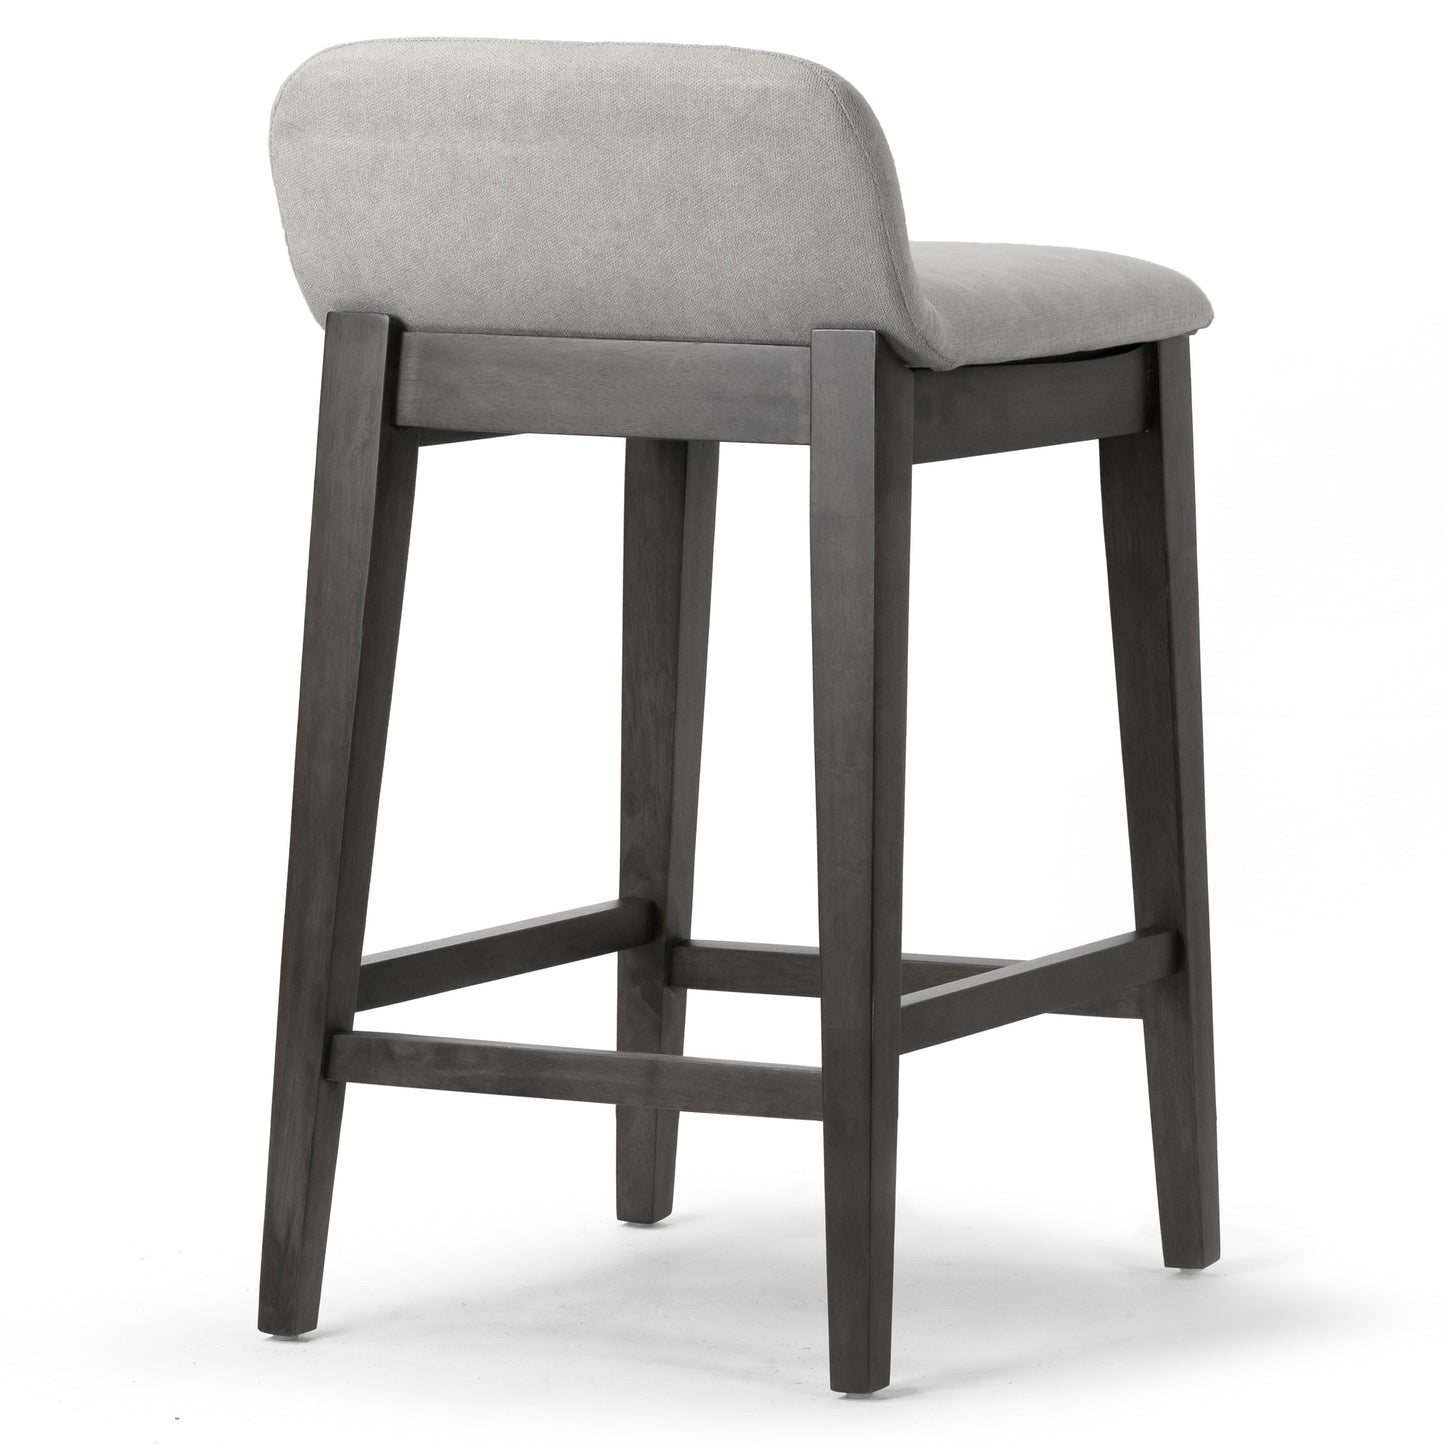 Set of 2 Atia Black Rubberwood Counter Stool with Low Back Fabric Seat